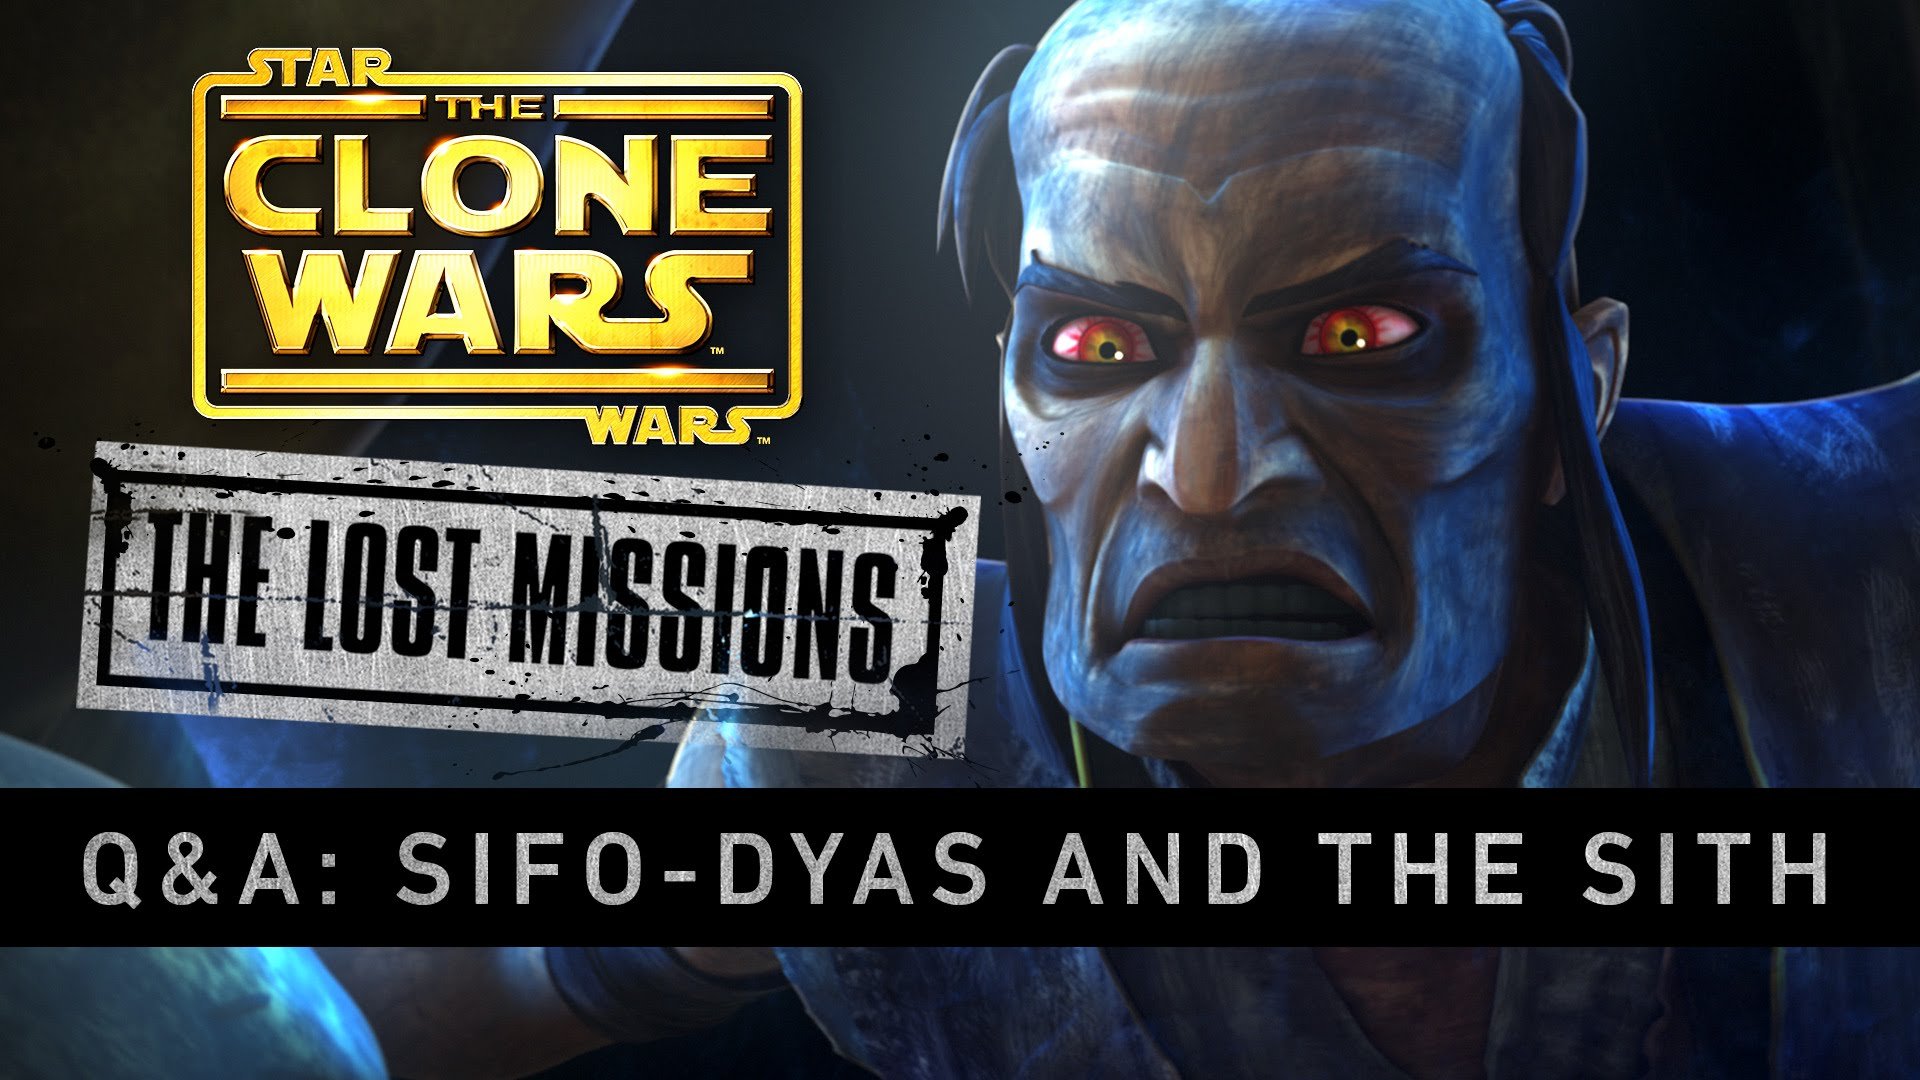 The Clone Wars - The Lost Missions Q&A: Sifo-Dyas and the Sith. 